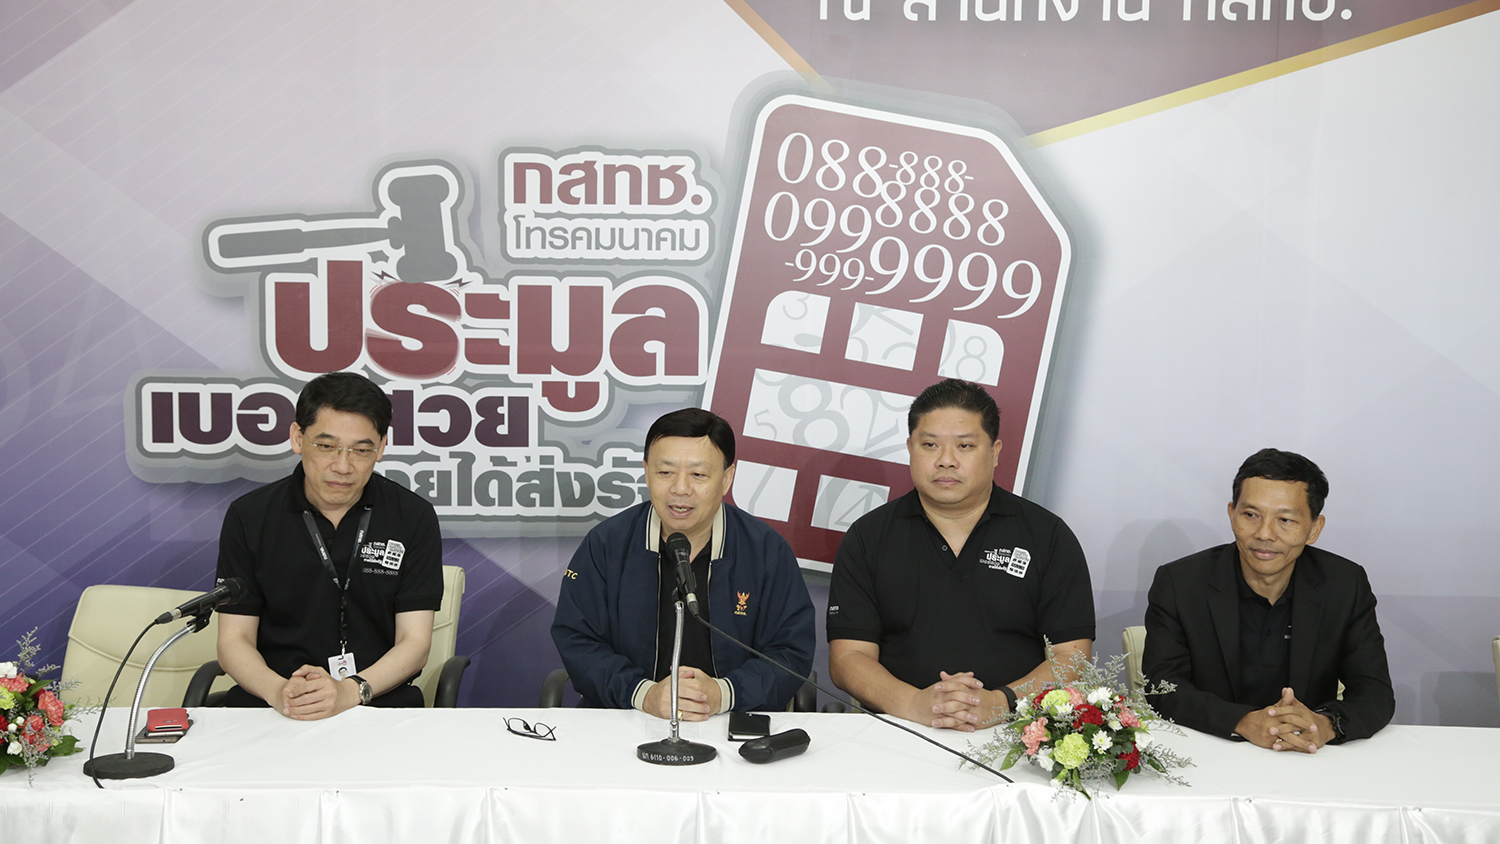 Thailand News 09-03-17 NNT 5 200 lucky phone numbers up for grabs at NBTC 1JPG